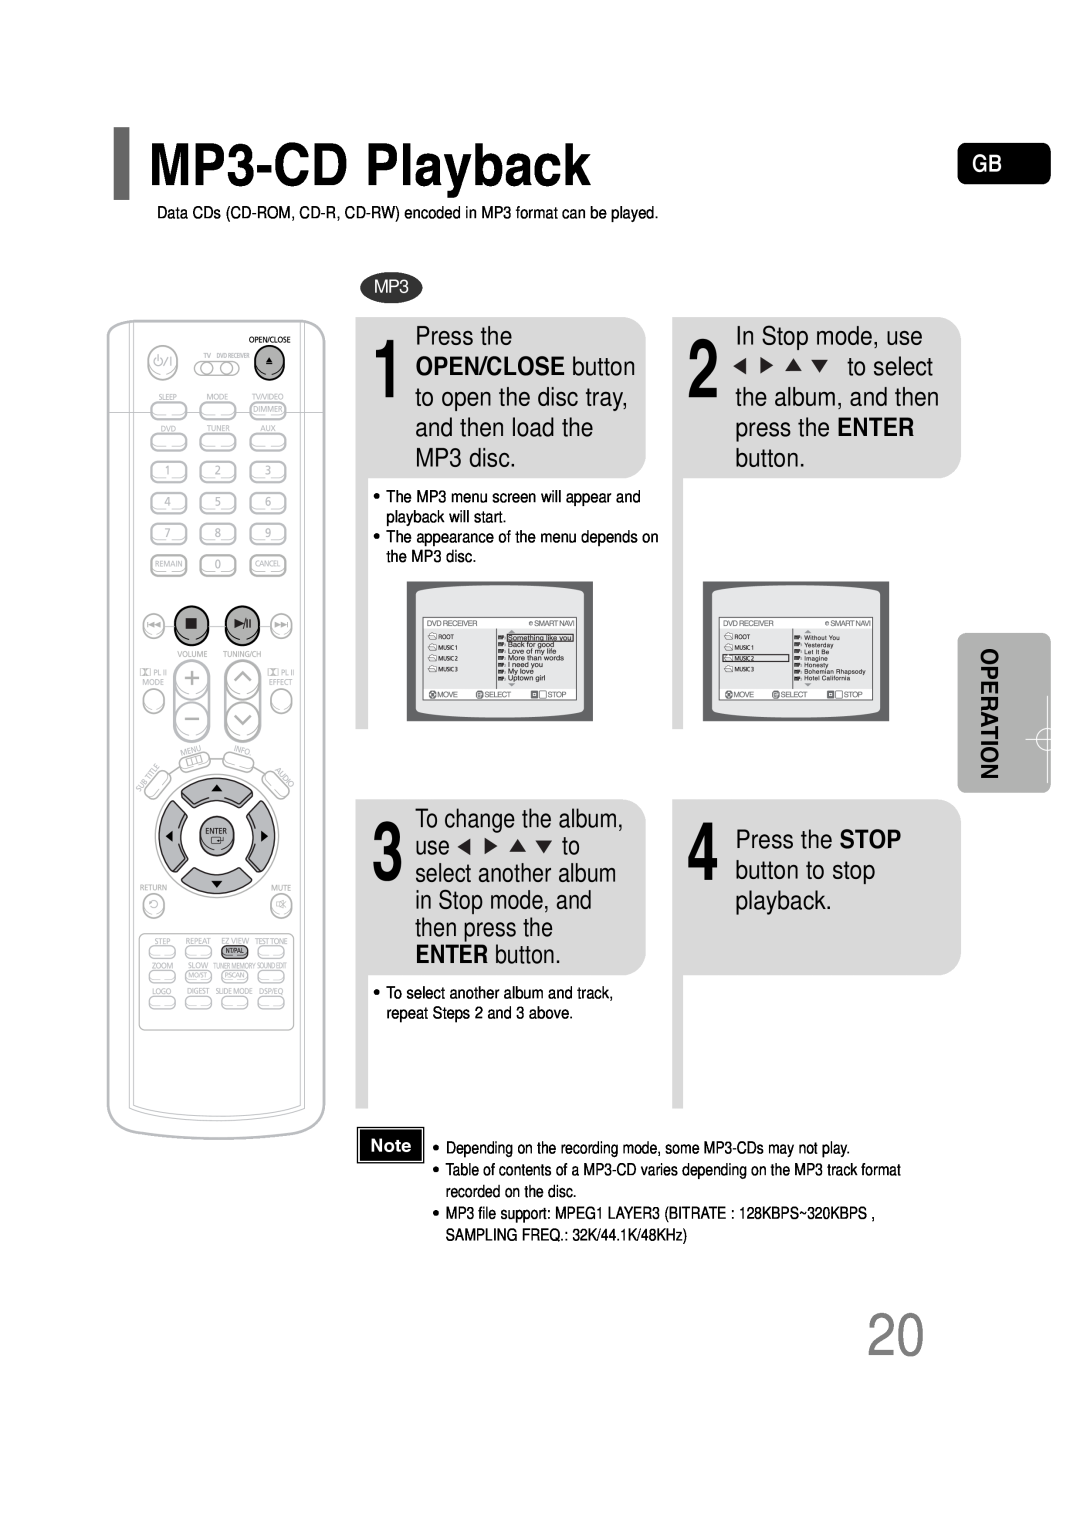 Samsung HT-P30 MP3-CDPlayback, Press the, In Stop mode, use 2 to select the album, and then, press the ENTER button 